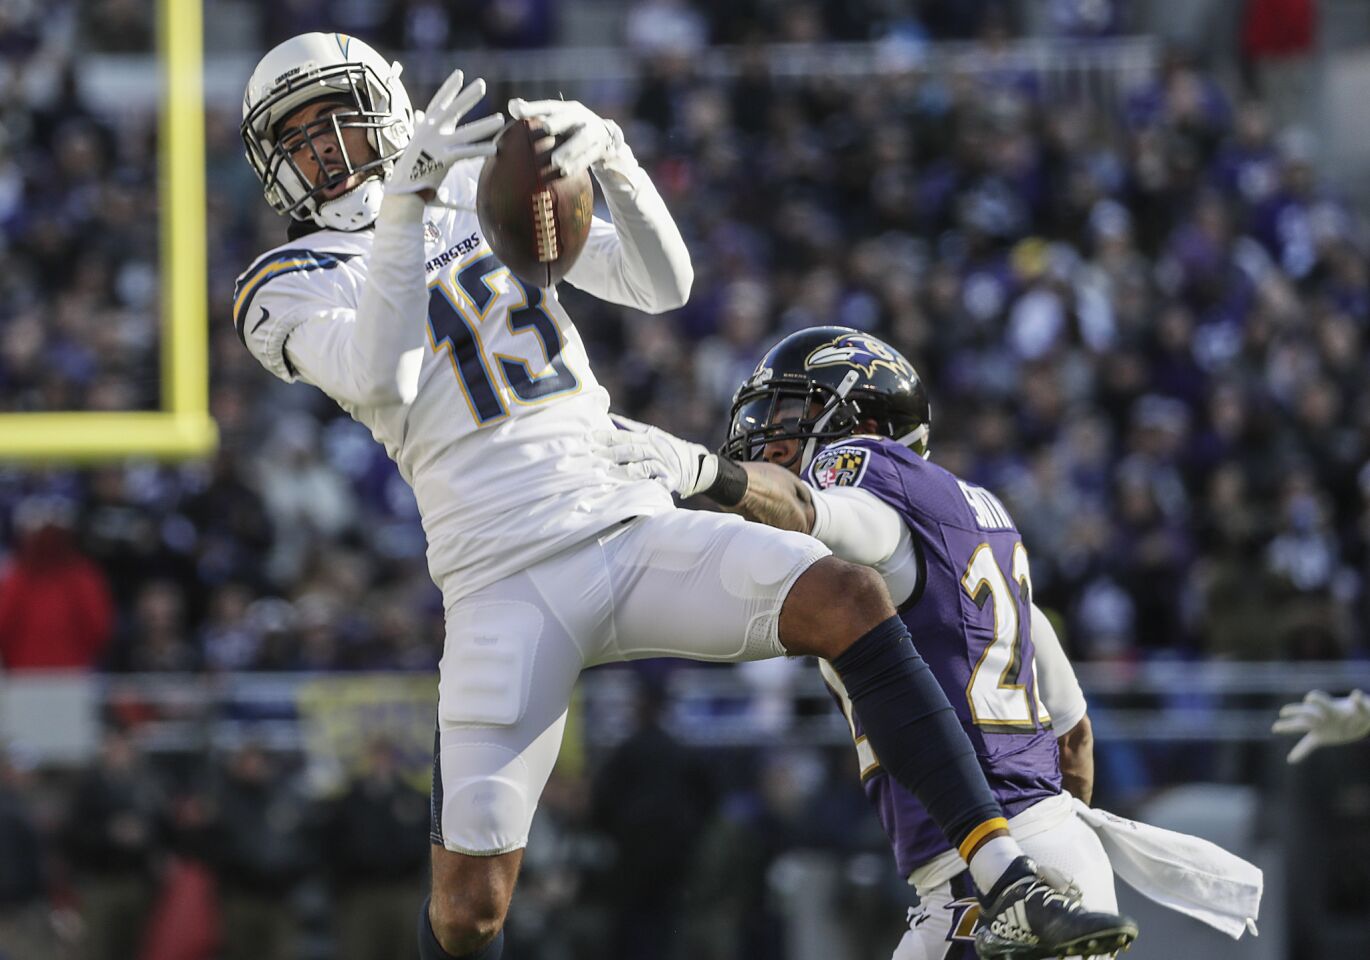 Chargers receiver Keenan Allen pulls down a 17-yard pass over Ravens cornerback Jimmy Smith during the second quarter.